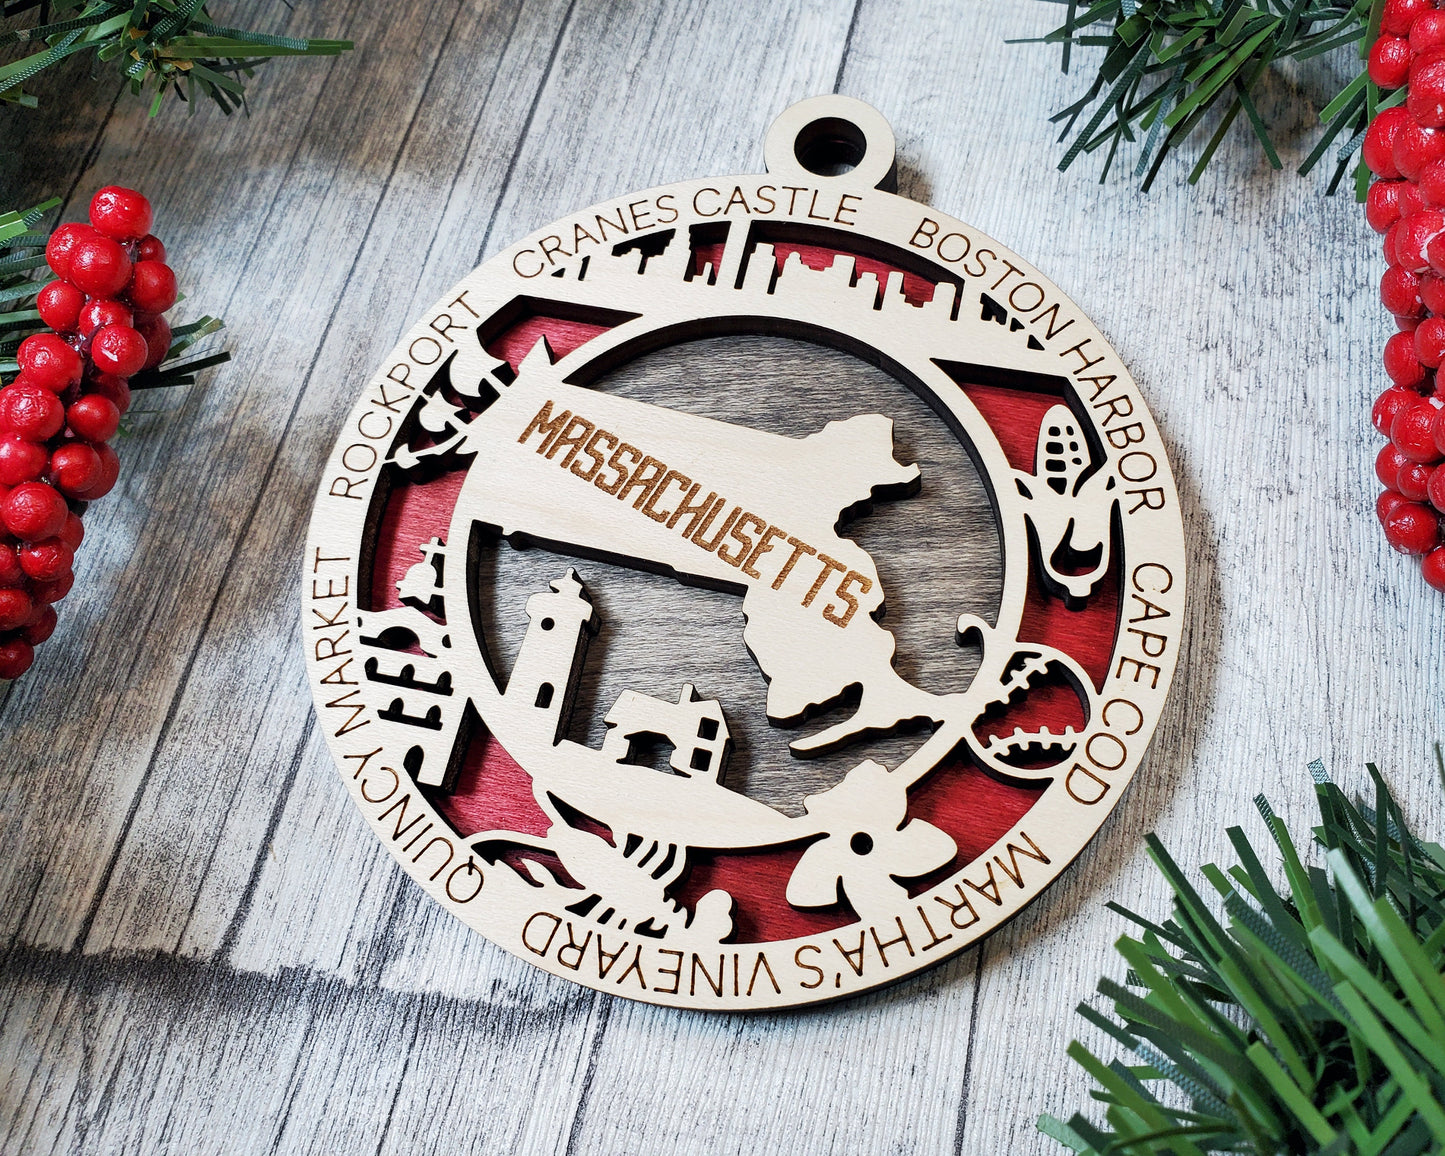 Massachusetts State Ornament - SVG File Download - Sized for Glowforge - Laser Ready Digital Files